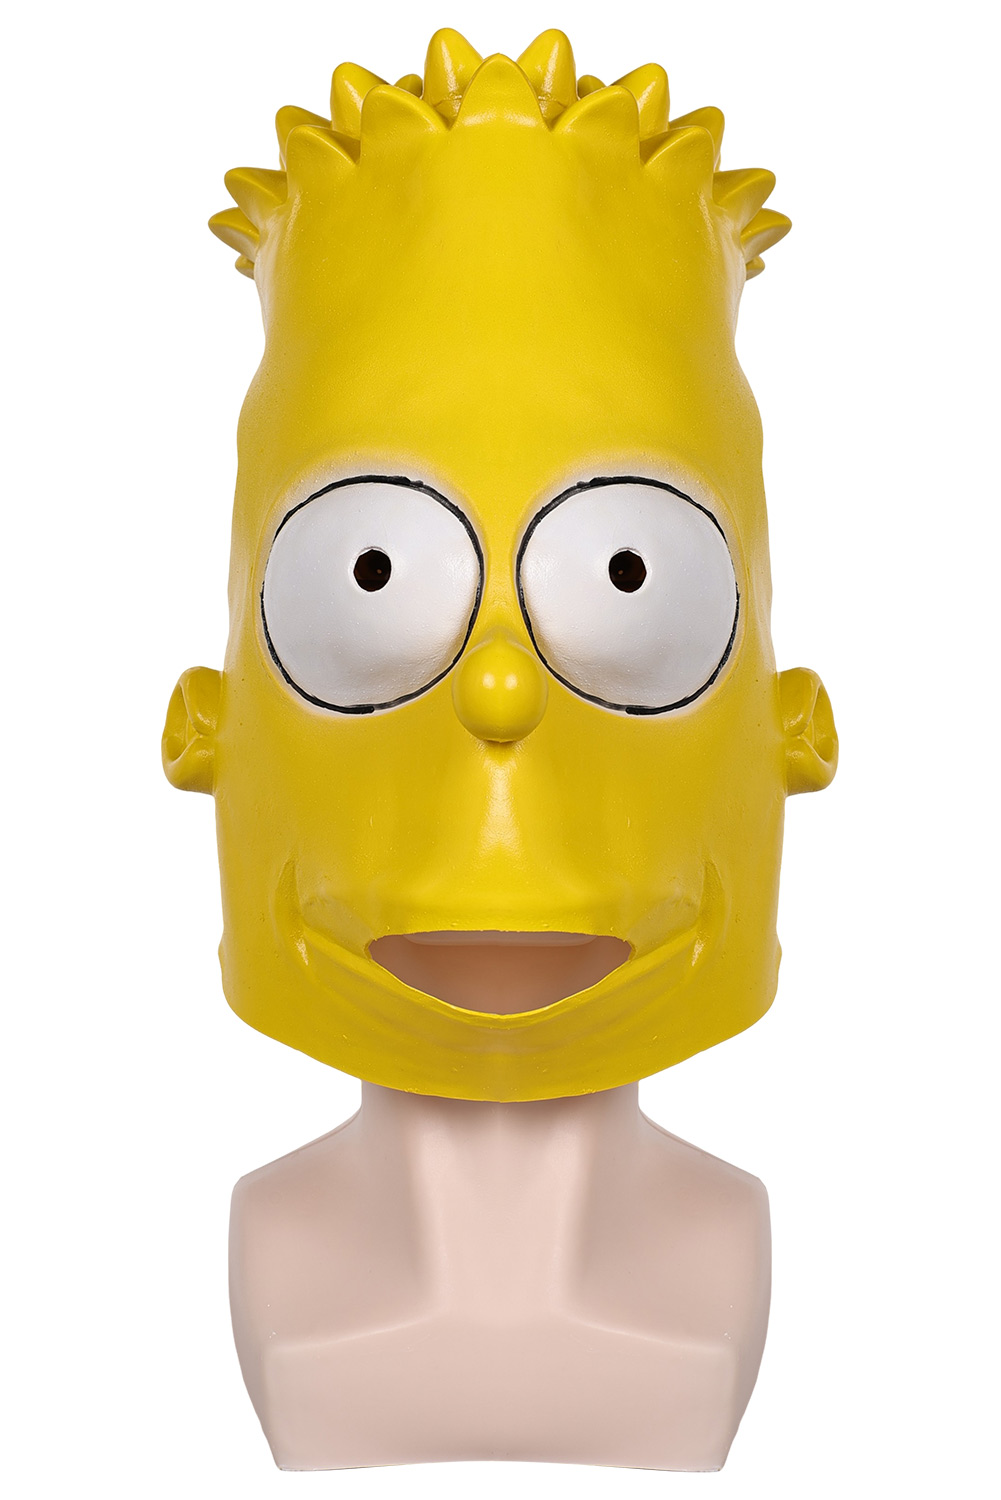 TV The Simpsons Bart Simpson Cosplay Latex Masks Helmet Masquerade Halloween Party Costume Props